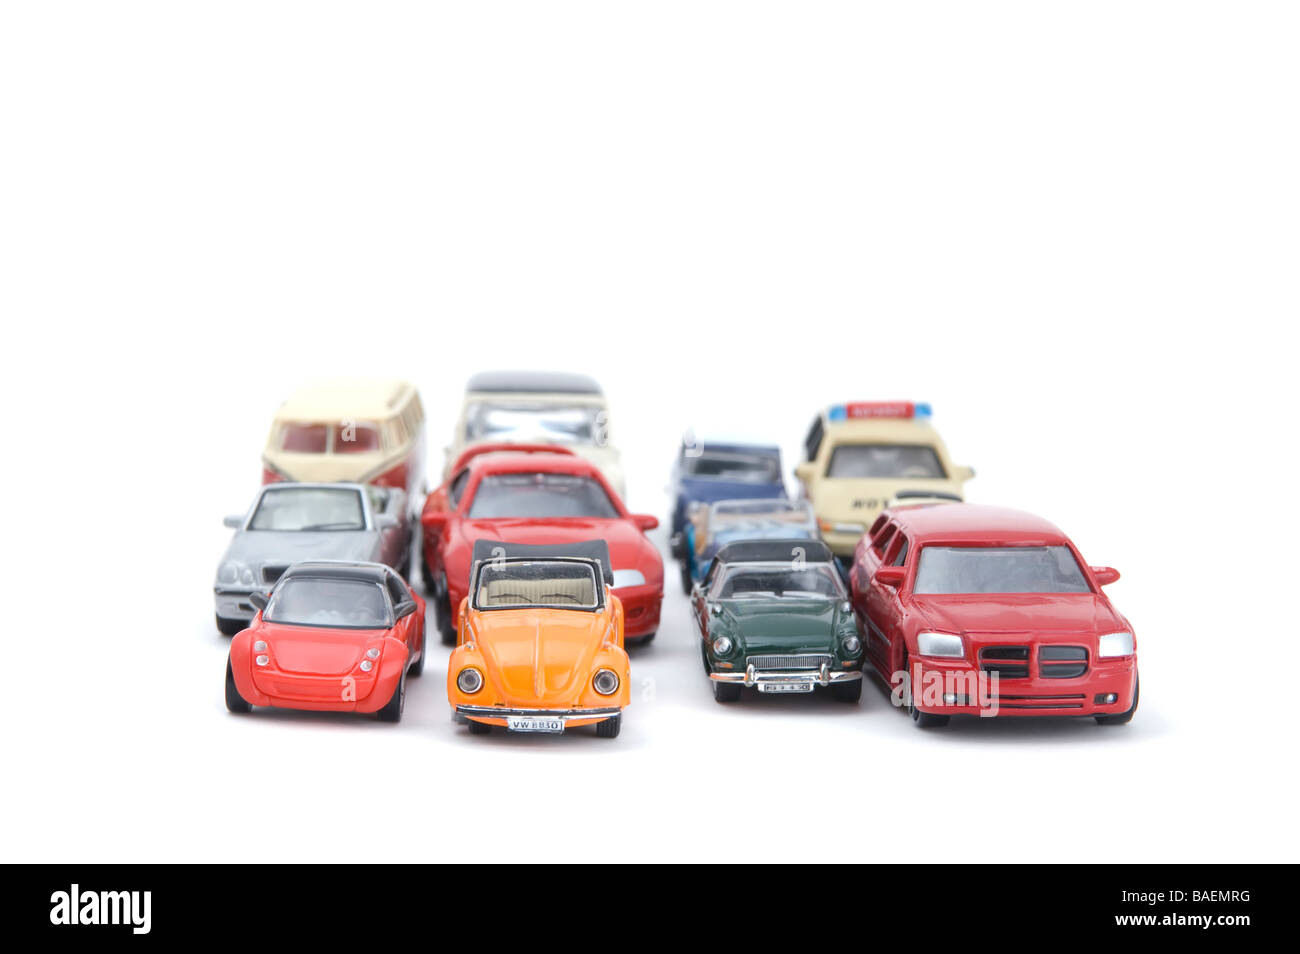 object on white model toy car Stock Photo